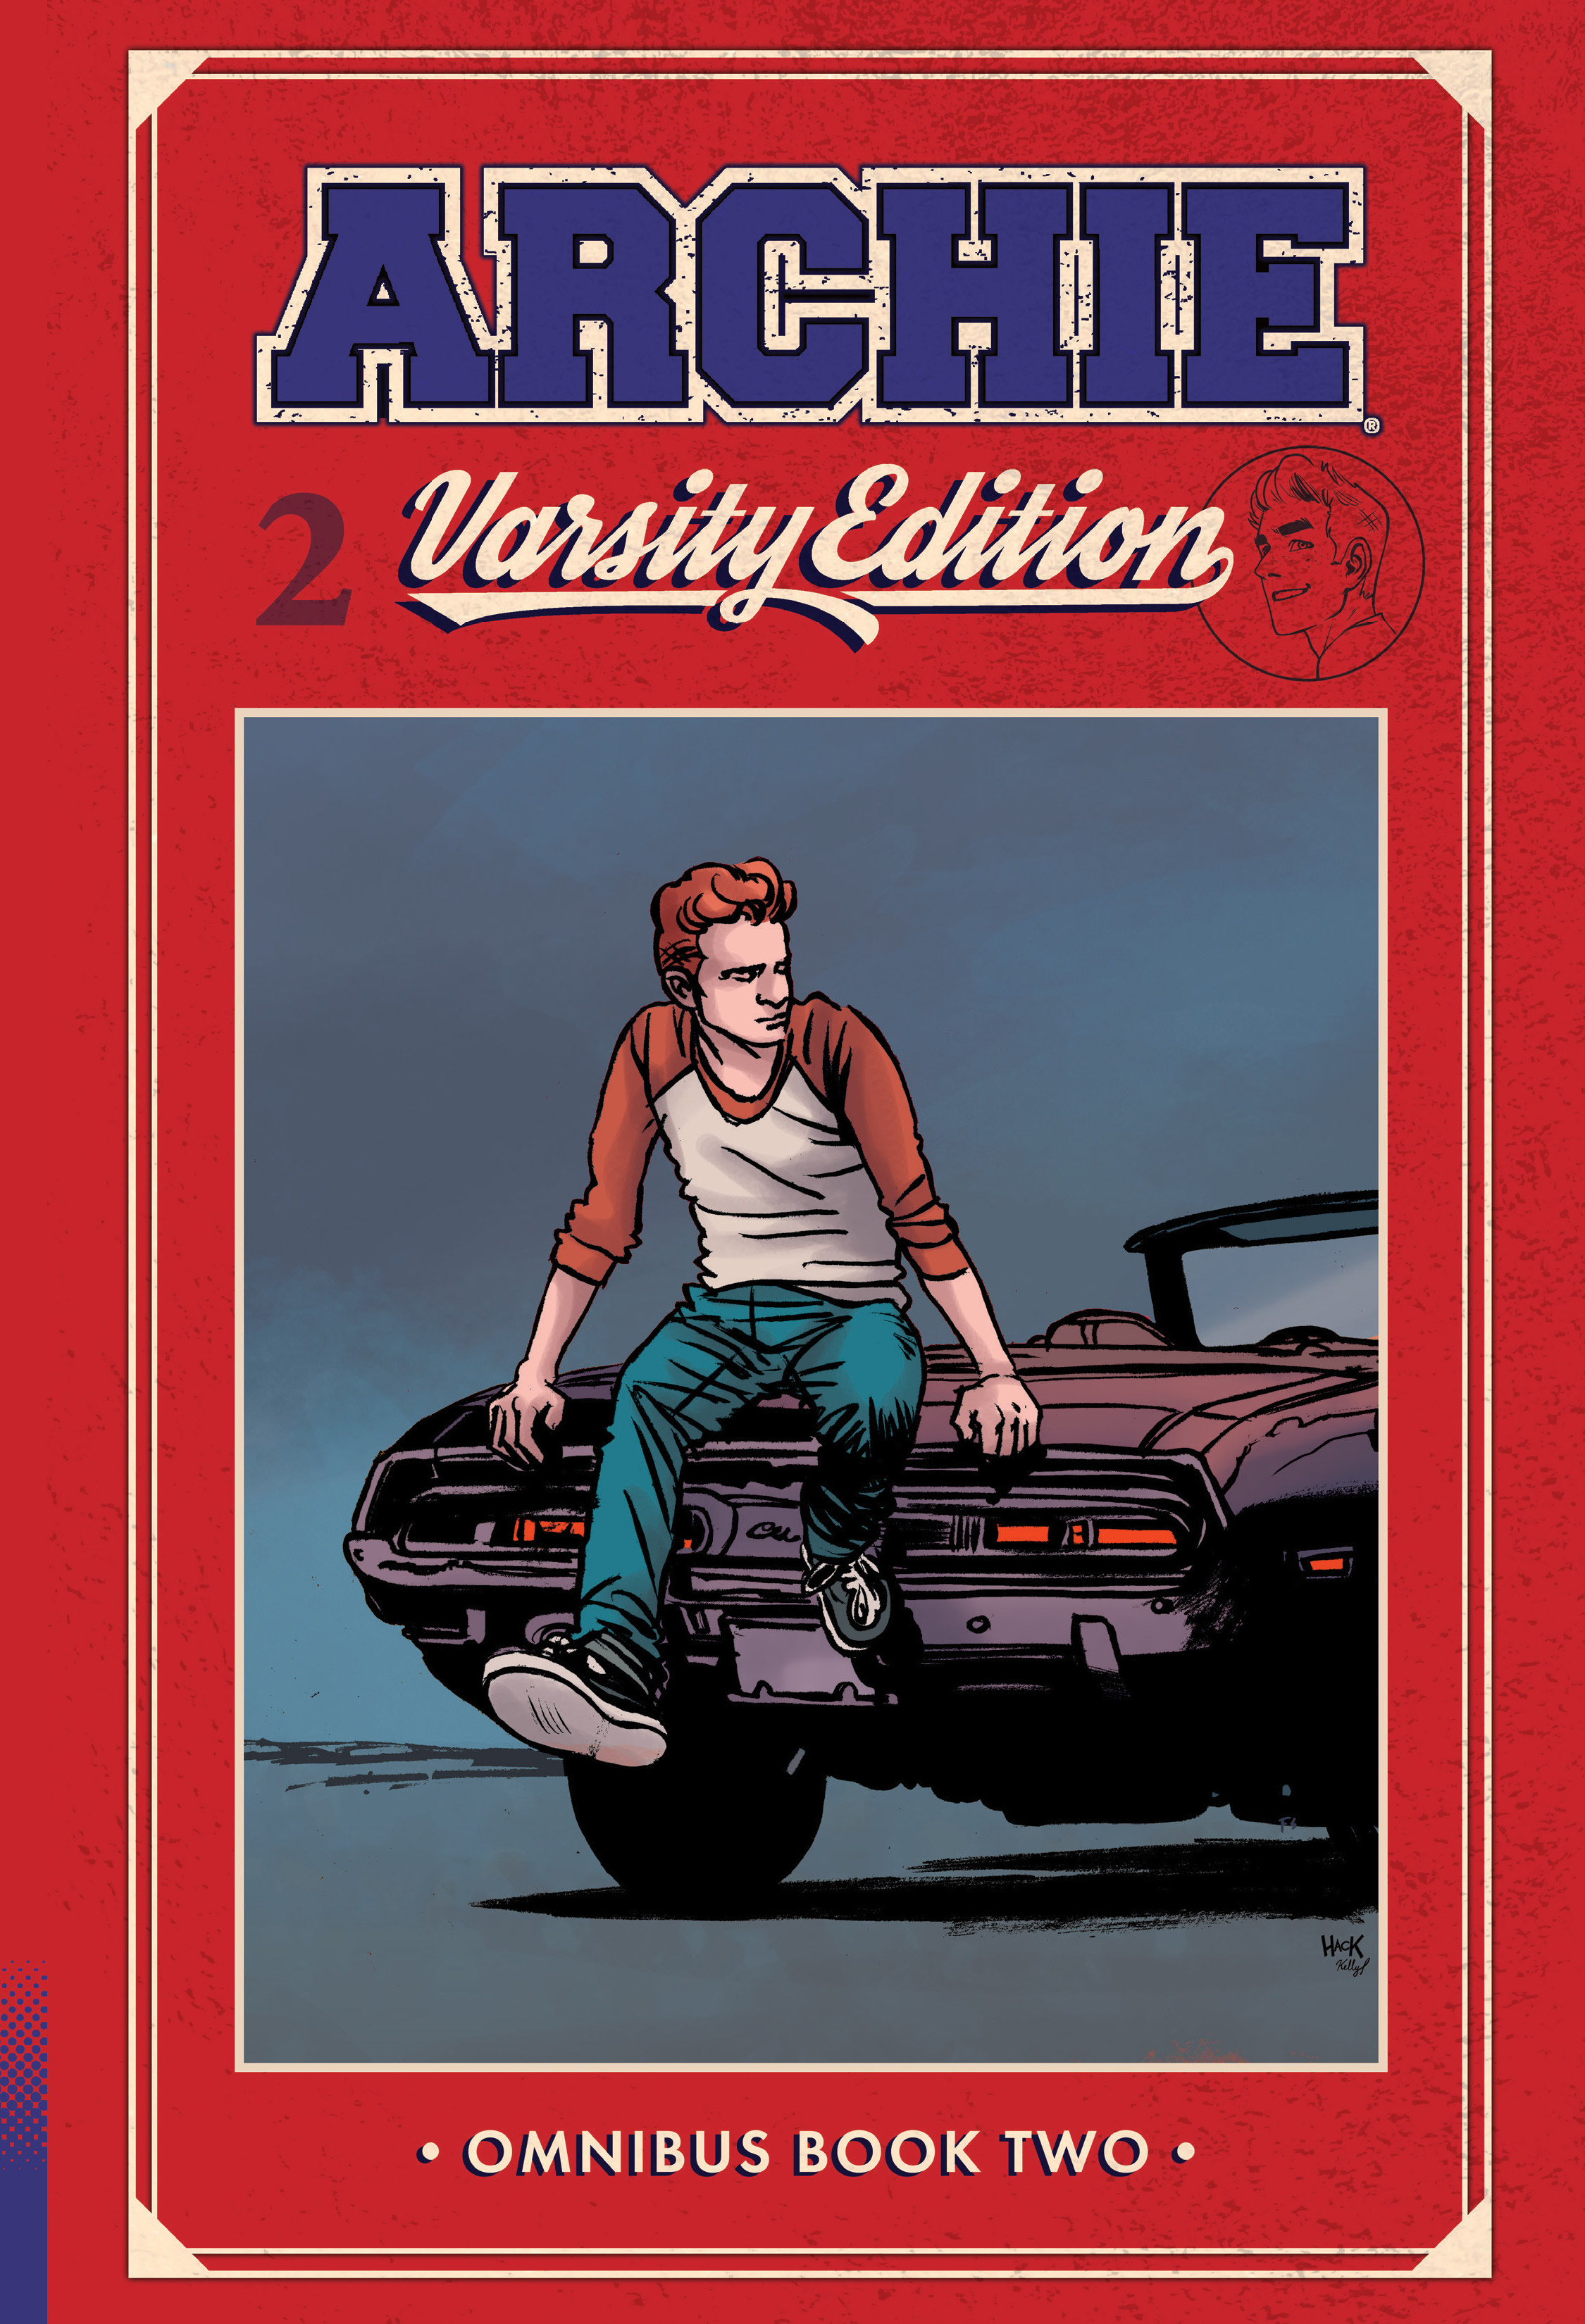 Read online Archie: Varsity Edition comic -  Issue # TPB 2 (Part 1) - 1